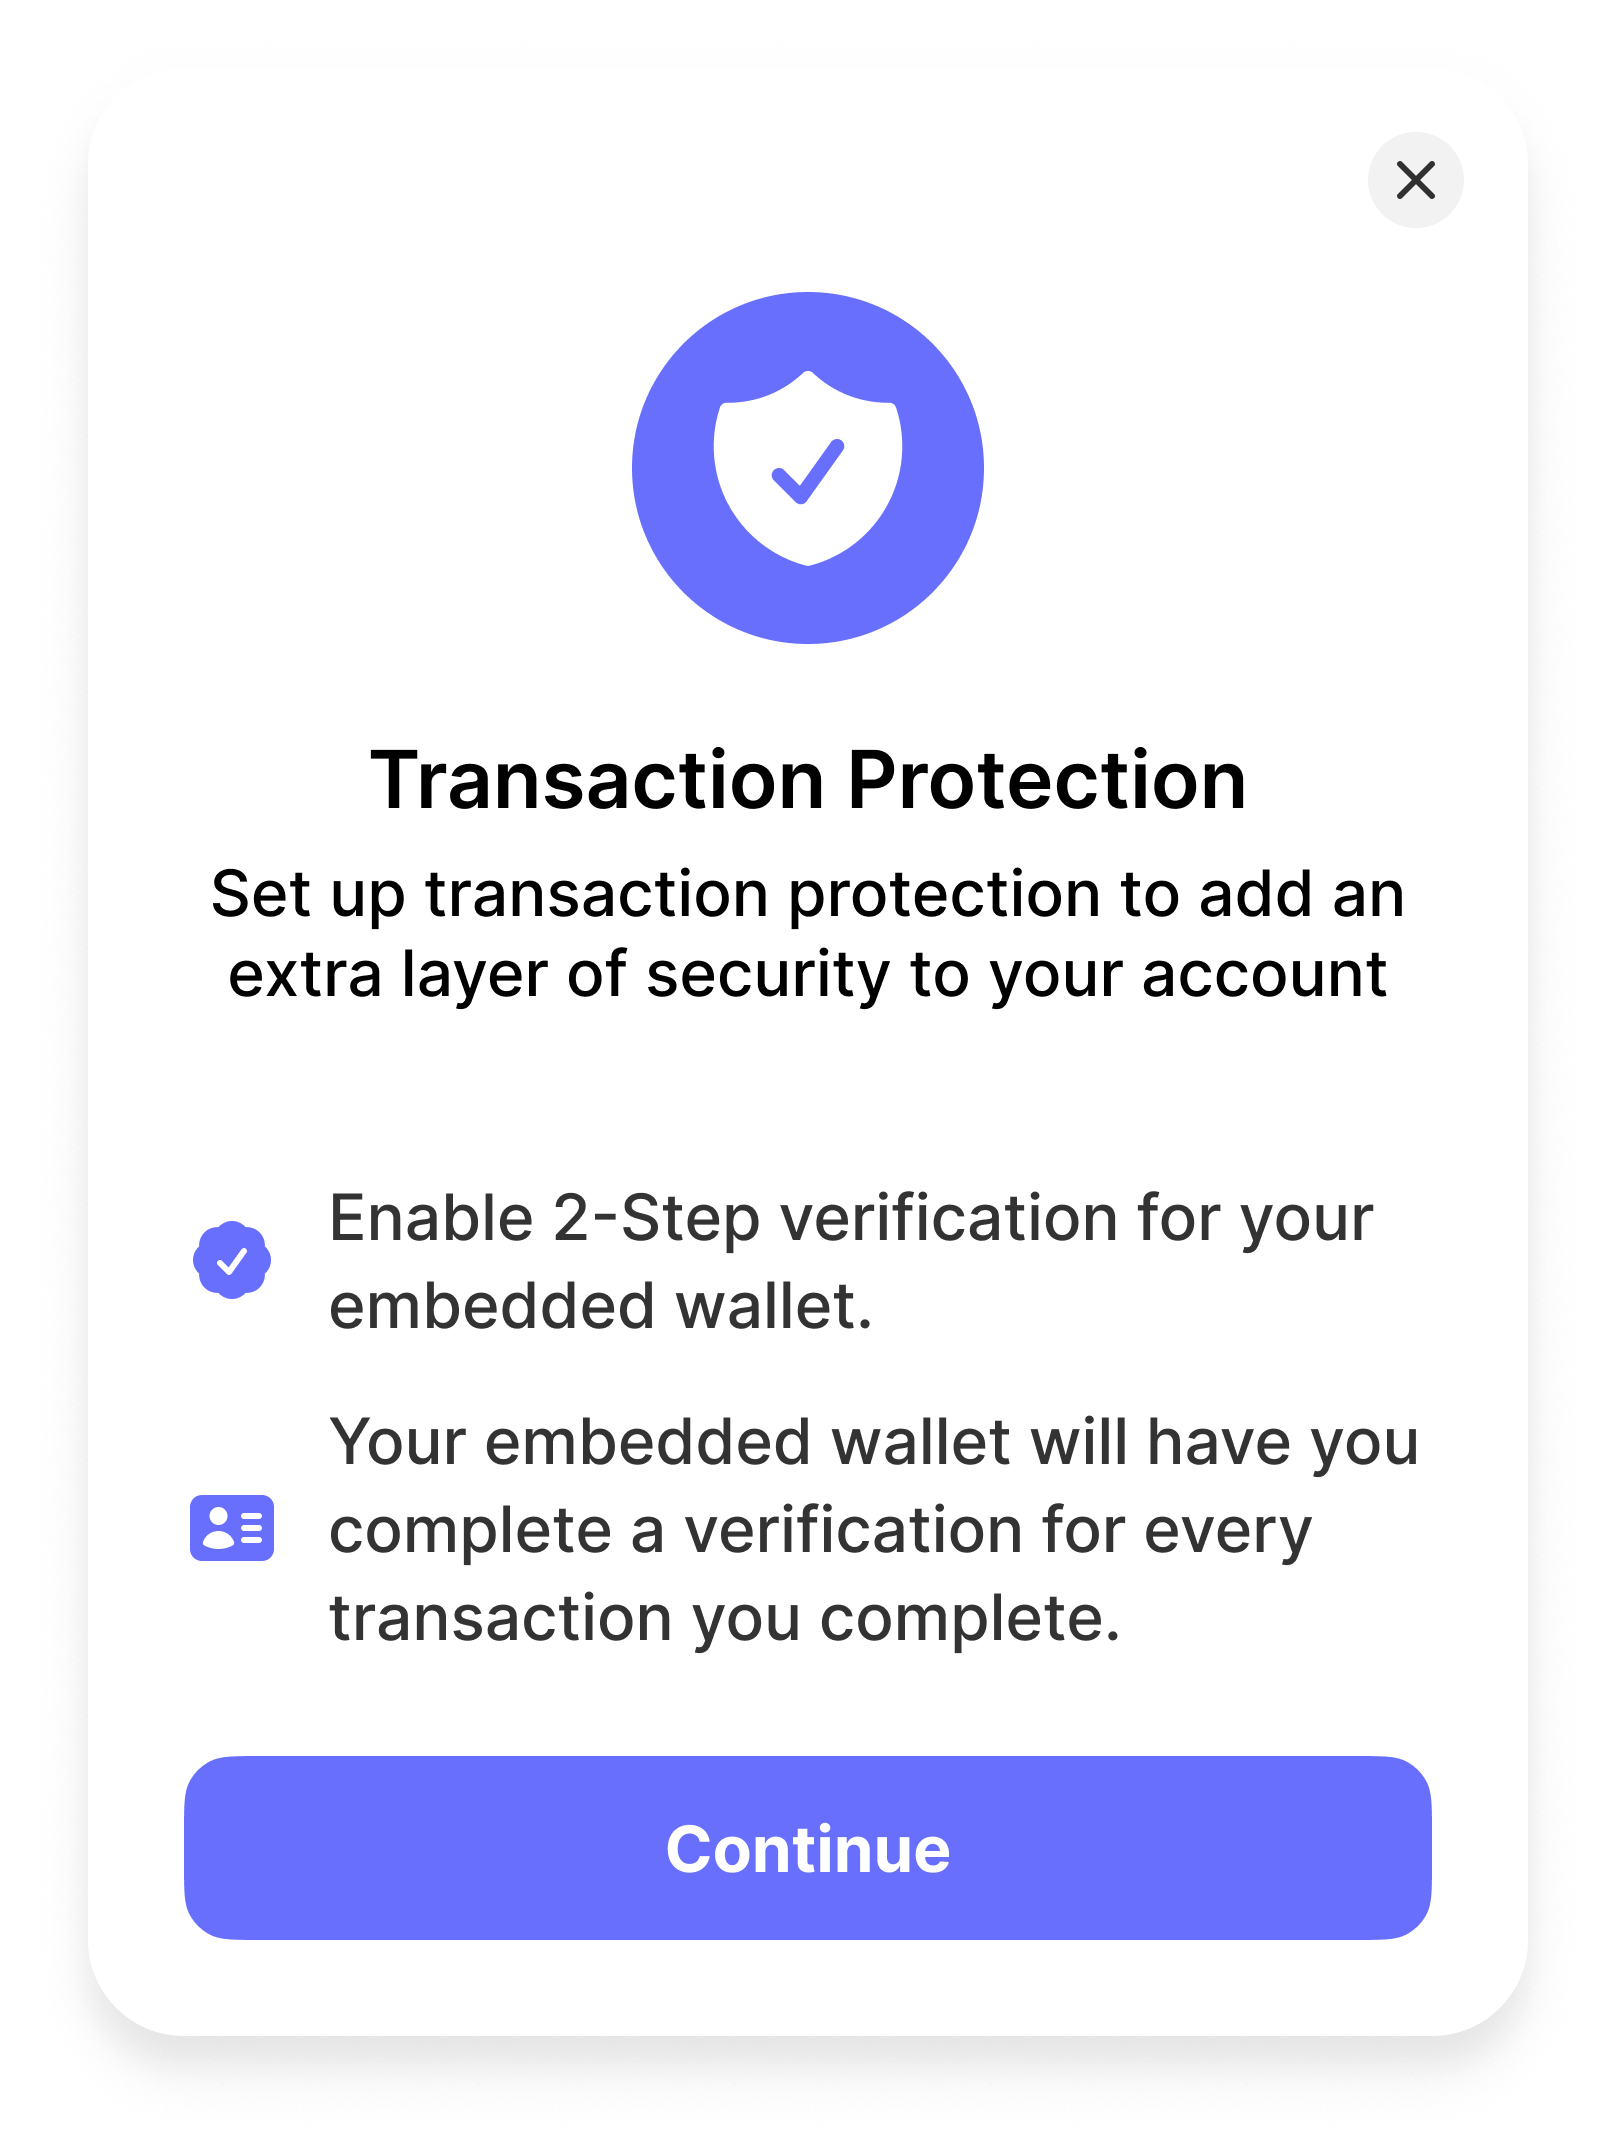 Using MFA to secure the embedded wallet